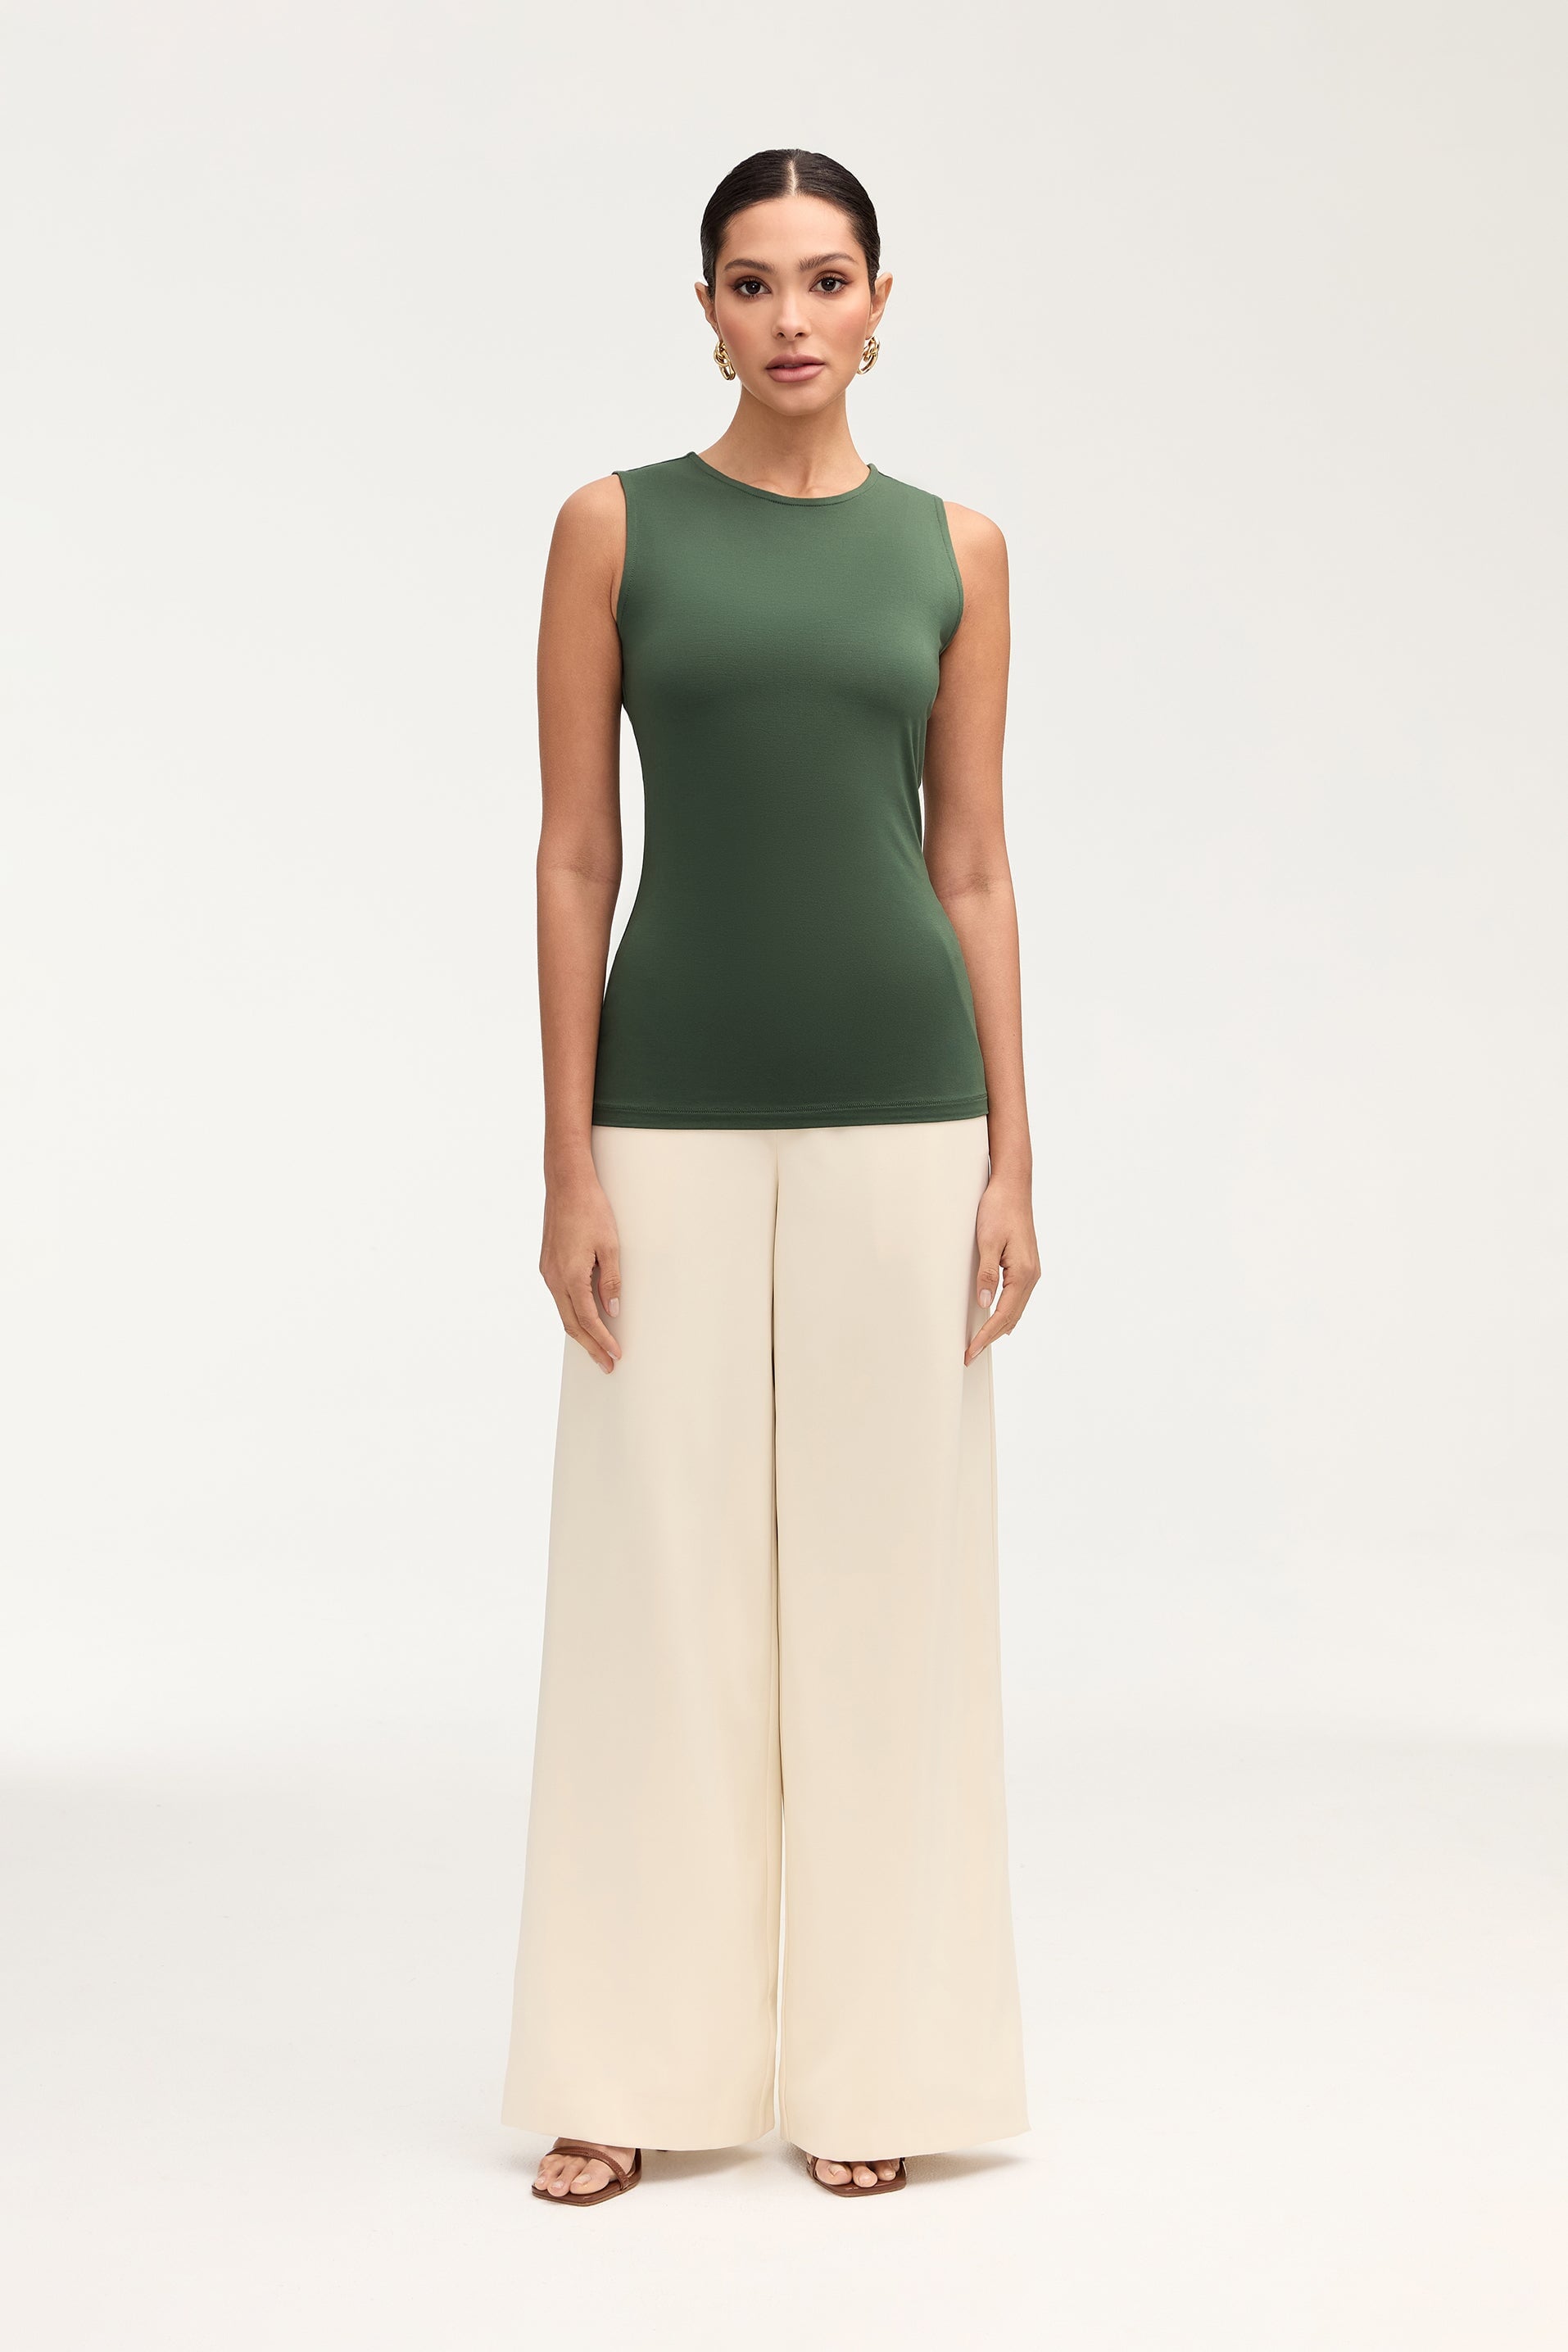 Labina Jersey Two Piece Tie Front Top - Cilantro Clothing Veiled 